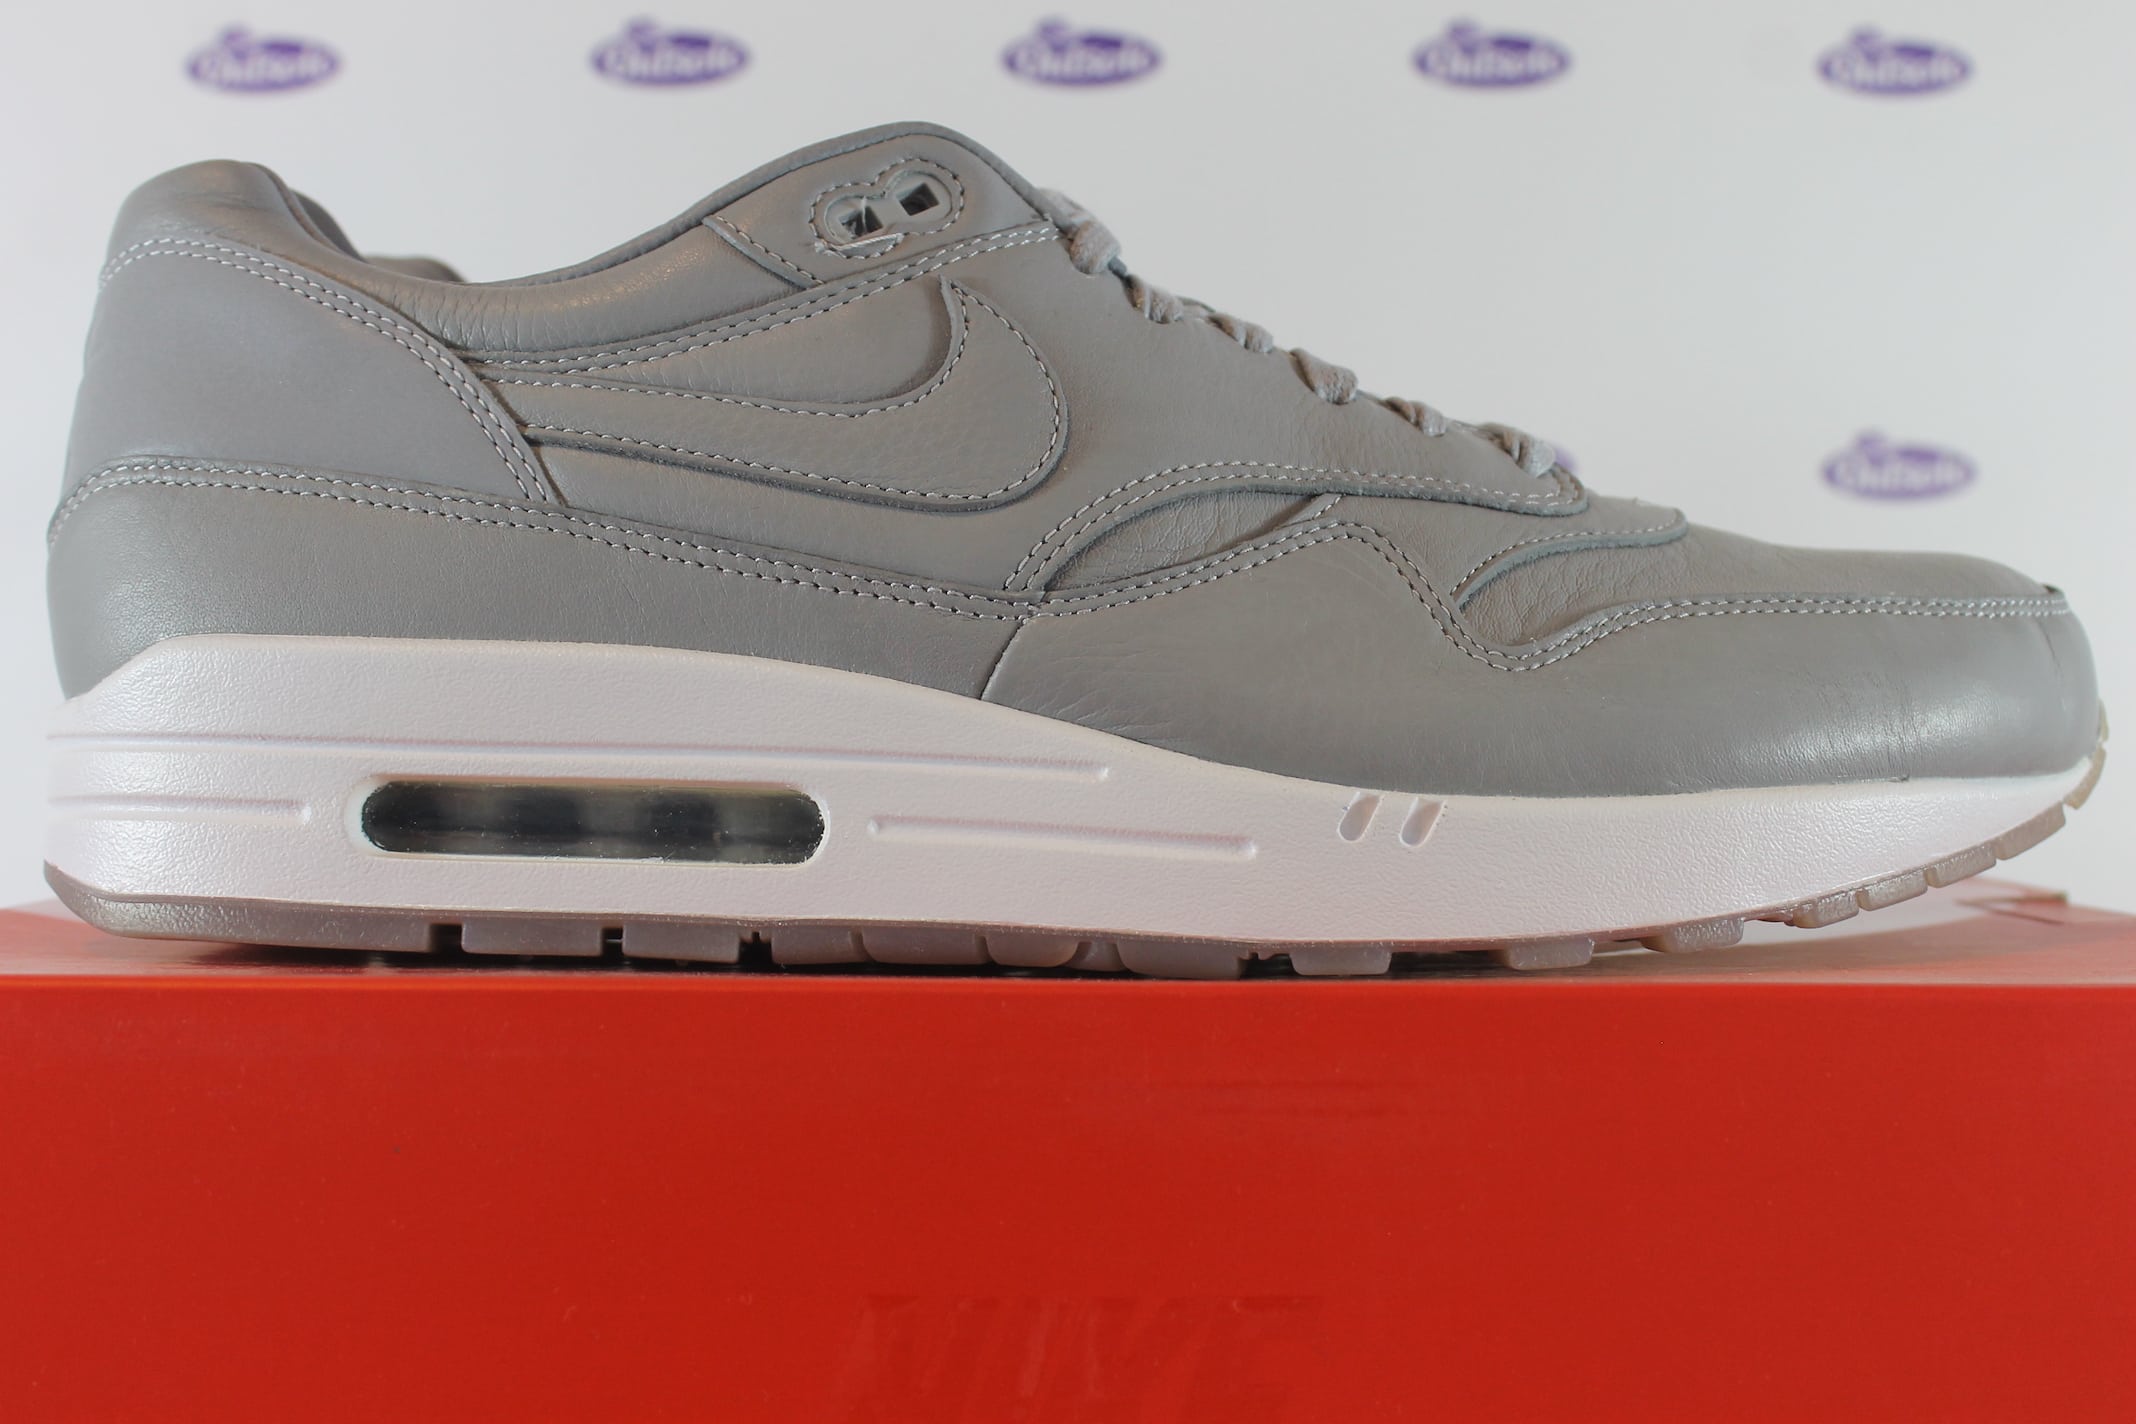 Nike Air Max 1 NikeLab Deluxe Pinnacle Wolf Grey ✓ stock at Outsole